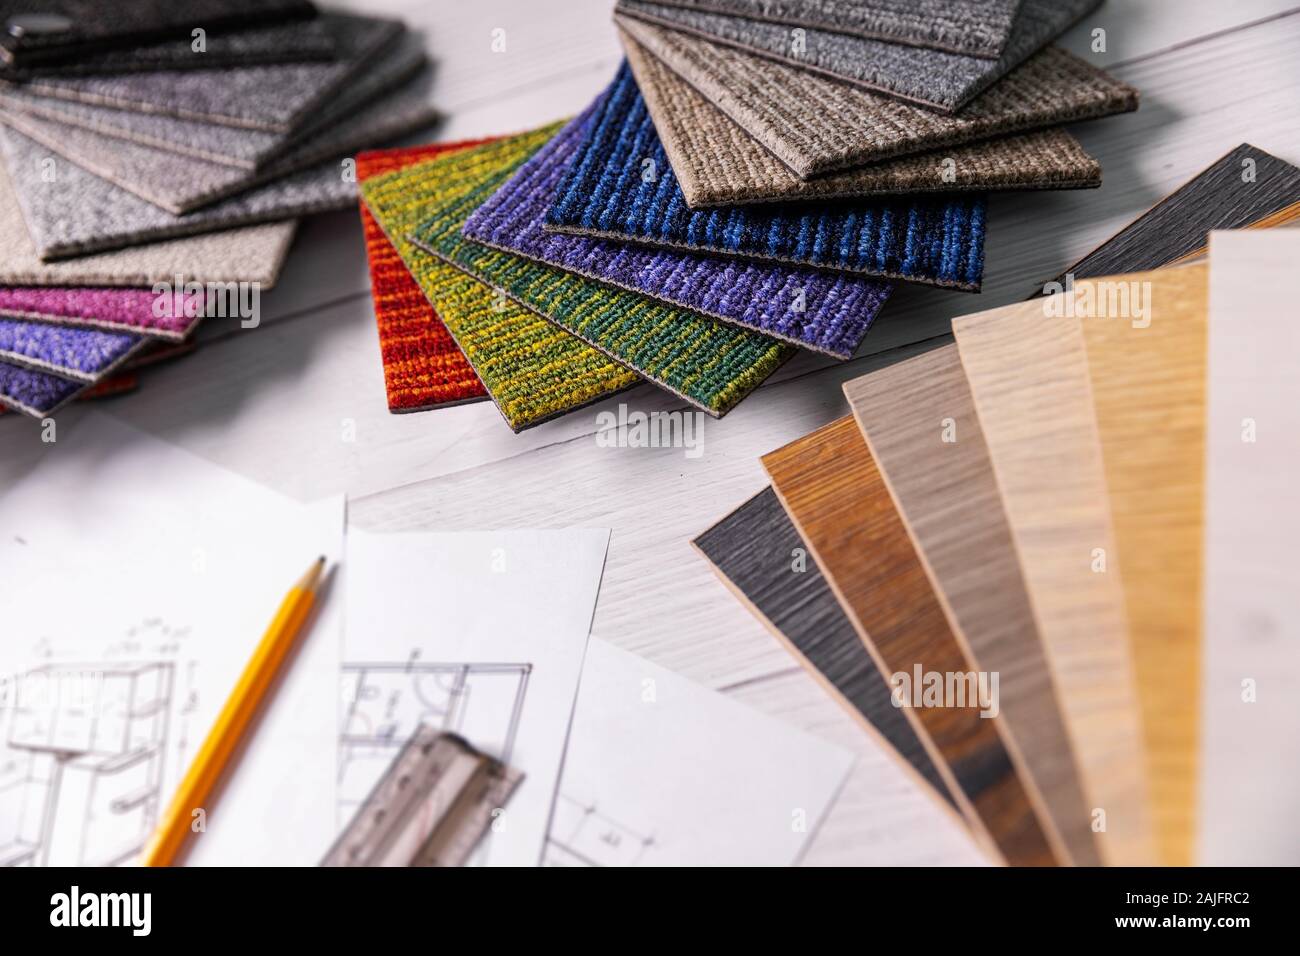 flooring and furniture materials - floor carpet and wooden laminate samples for interior design project Stock Photo